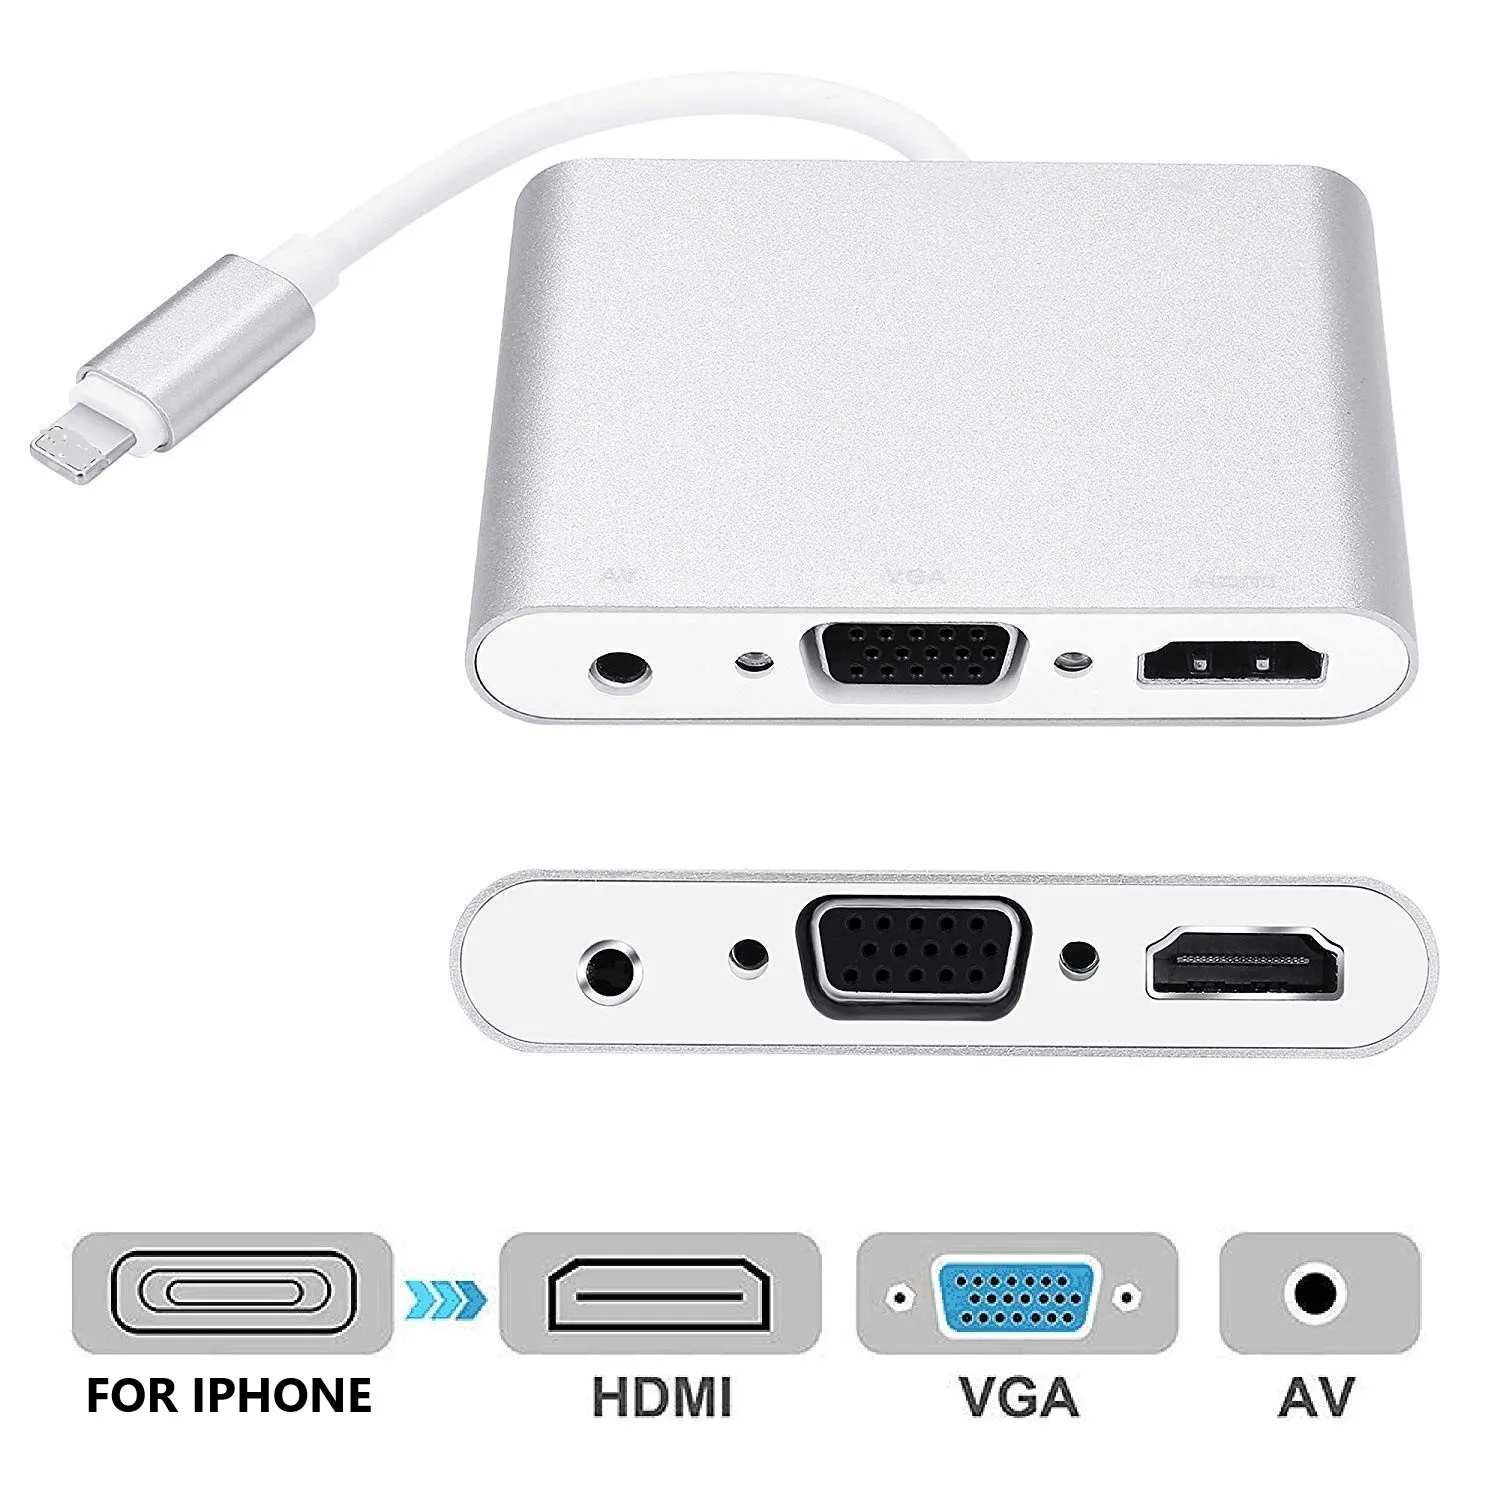 

4 In1 Digital Audio Video HDTV Converter for IPhone To HDMI VGA AV Adapter for IPhone Xs X XR 8 7 6plus for IPad Air/mini/pro